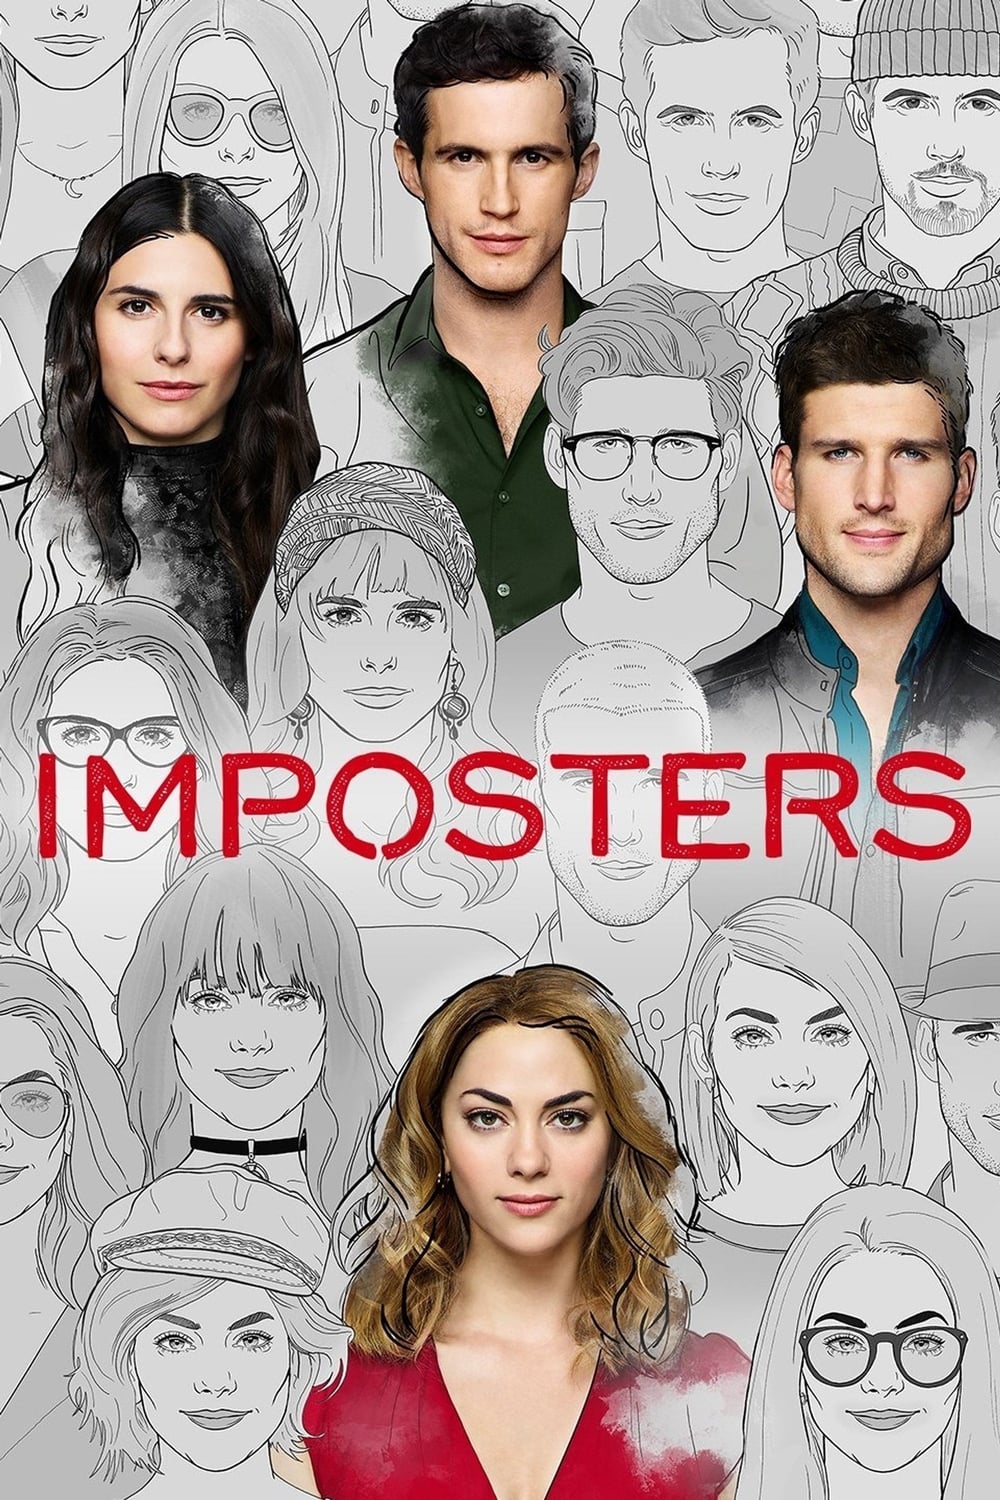 Imposters TV Shows About Fbi